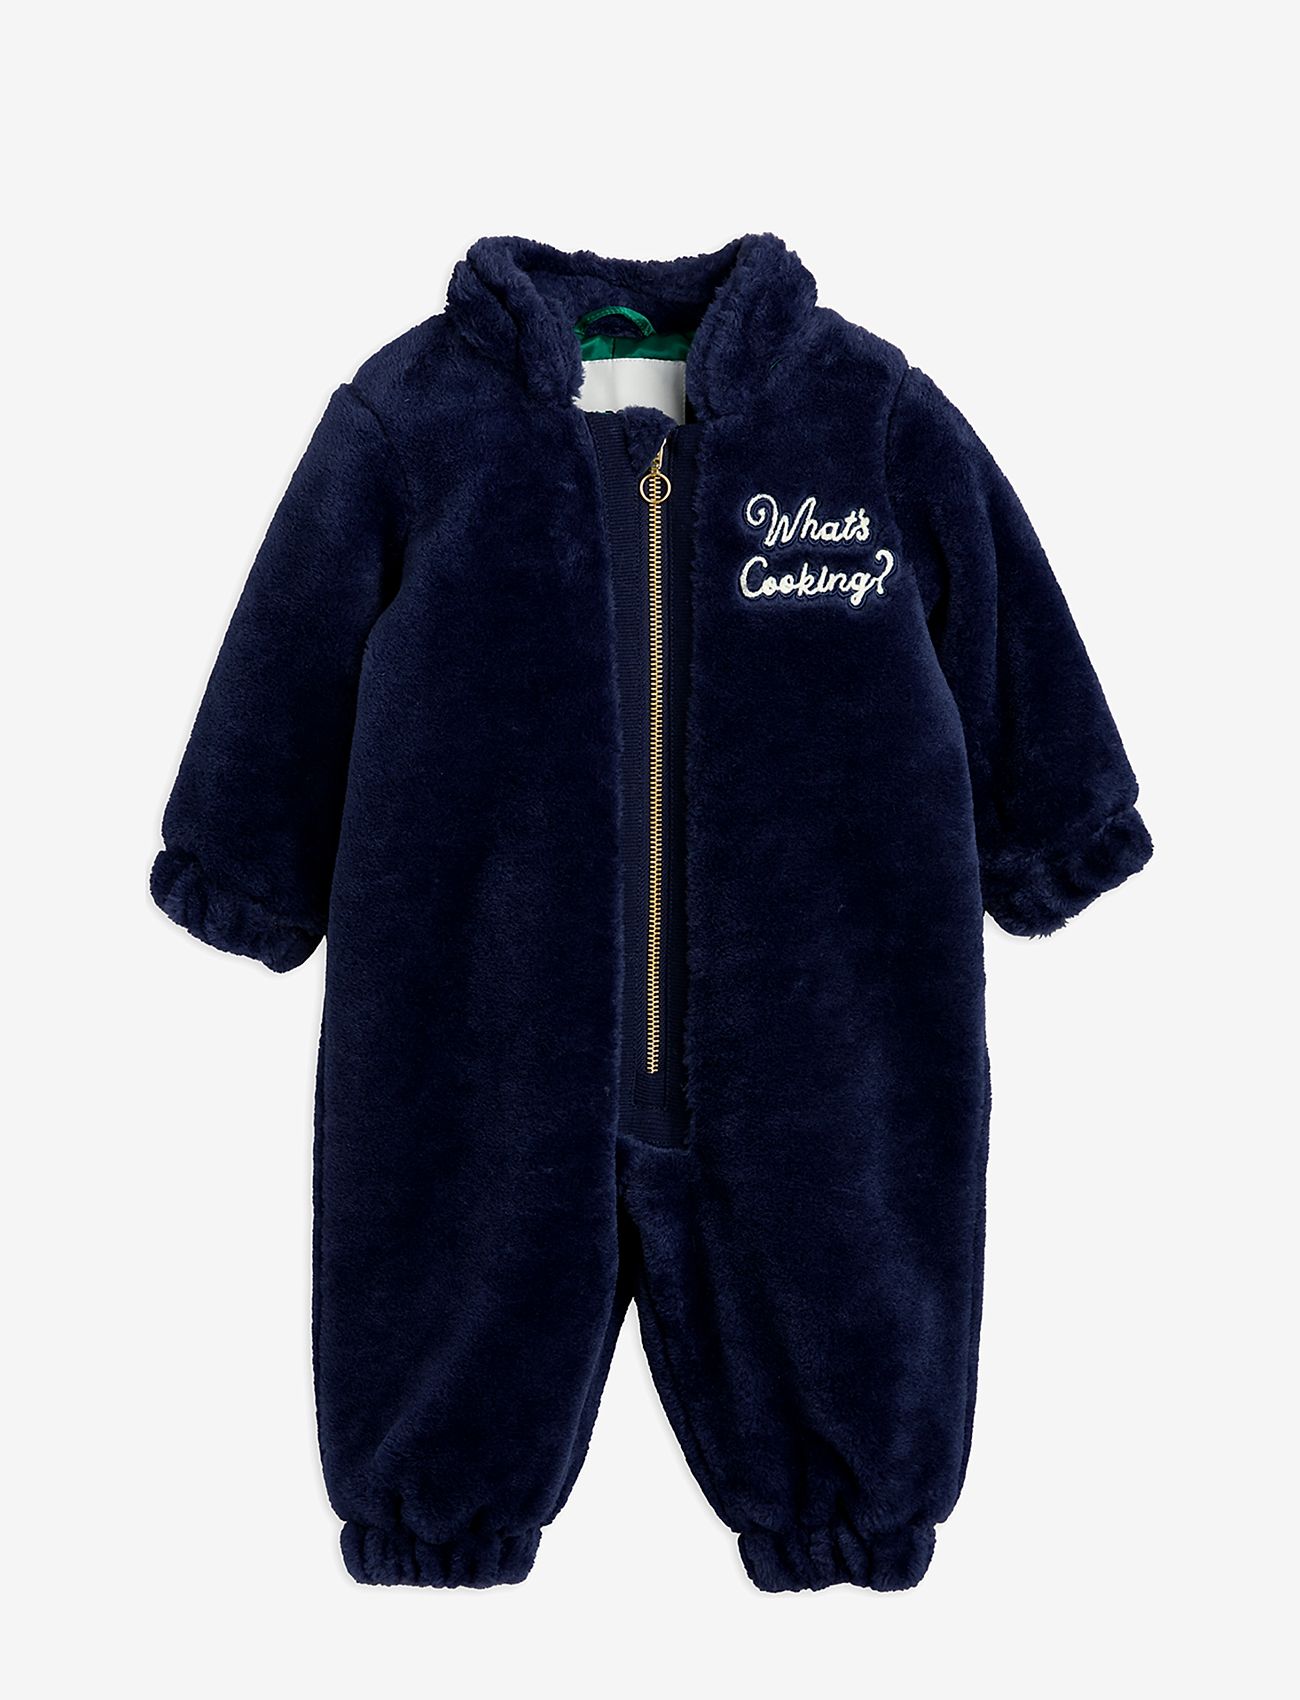 Mini Rodini - What's cooking faux fur baby overall - snowsuit - navy - 1